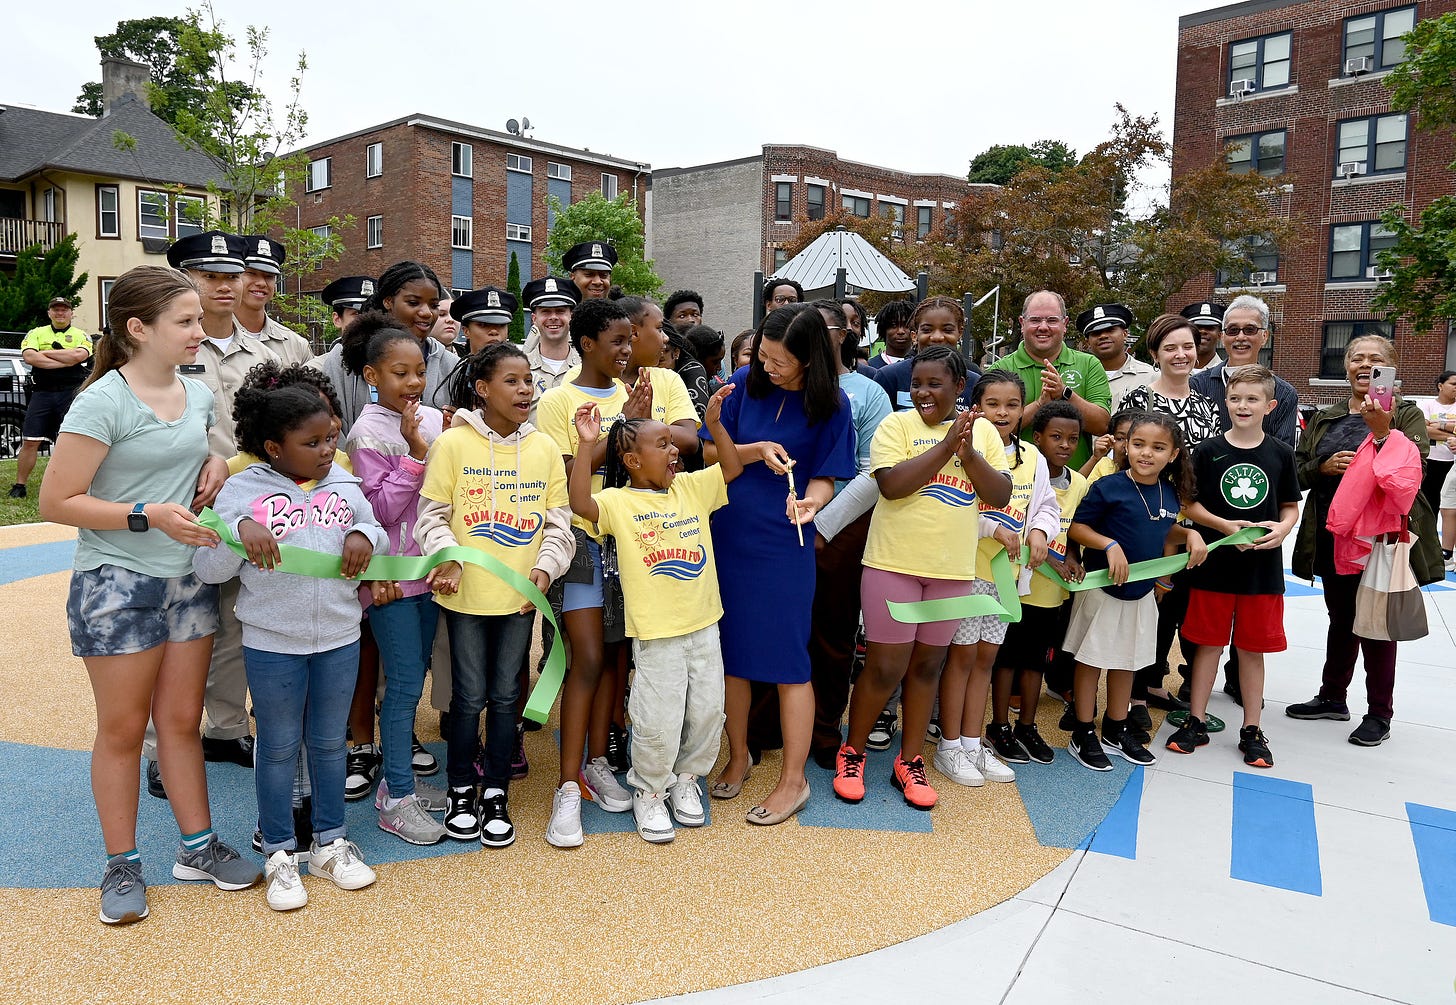 Mayor Wu and Parks Commissioner cut a green ribbon to officially open the new Walnut Park Play Area alongside about a dozen young people, members of the Boston Police Cadet program, and community members